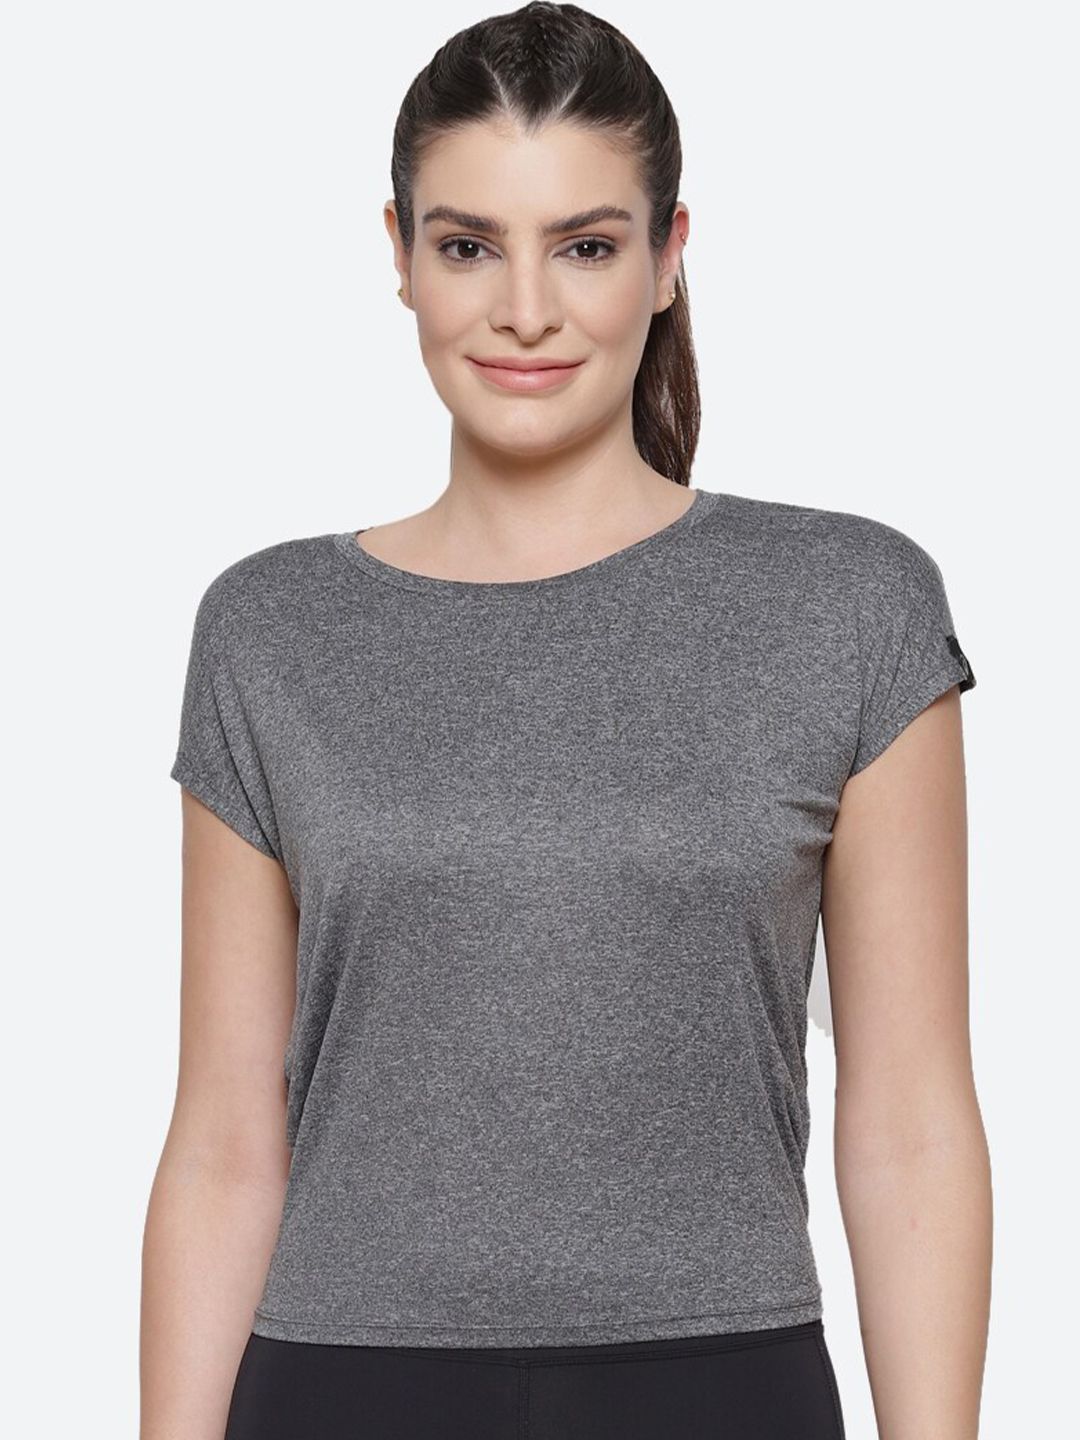 ASICS Women Grey Colourblocked Extended Sleeves Cut Outs Training T-shirt W SS Price in India